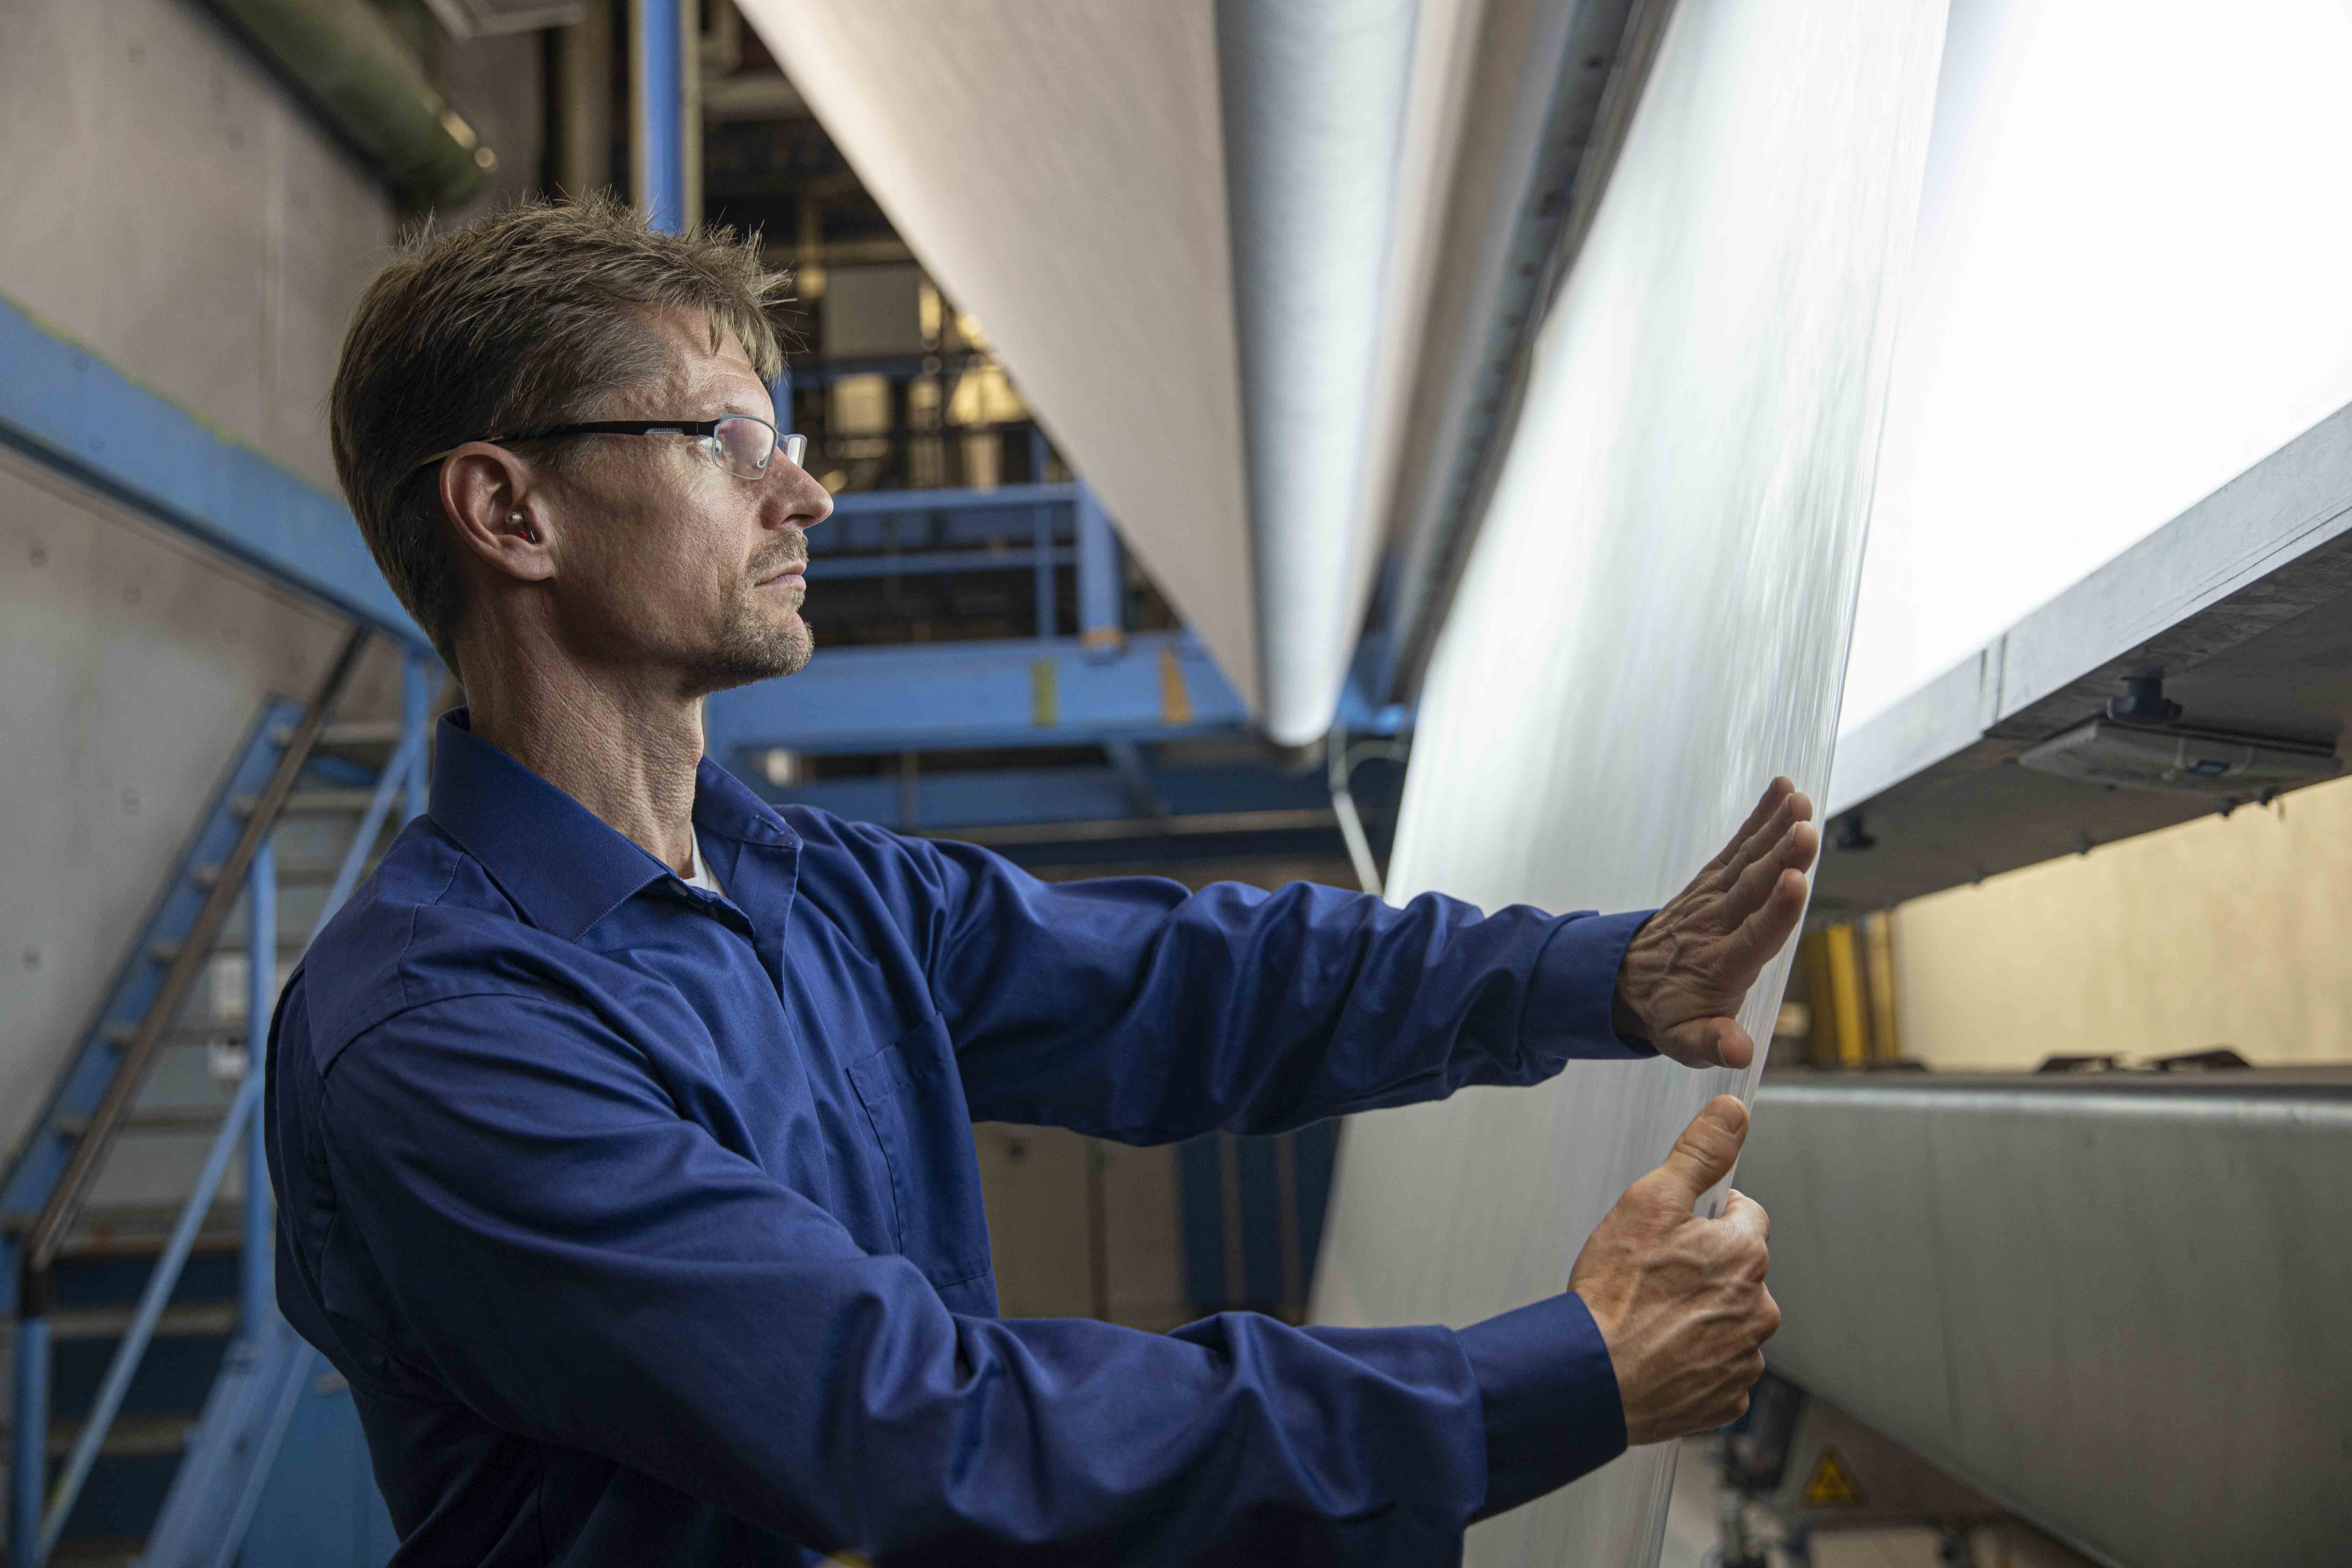 The mouth-nose masks’ triple-layered filter medium is made from a high-tech nonwoven. Freudenberg is planning to expand capacity in the next few weeks.